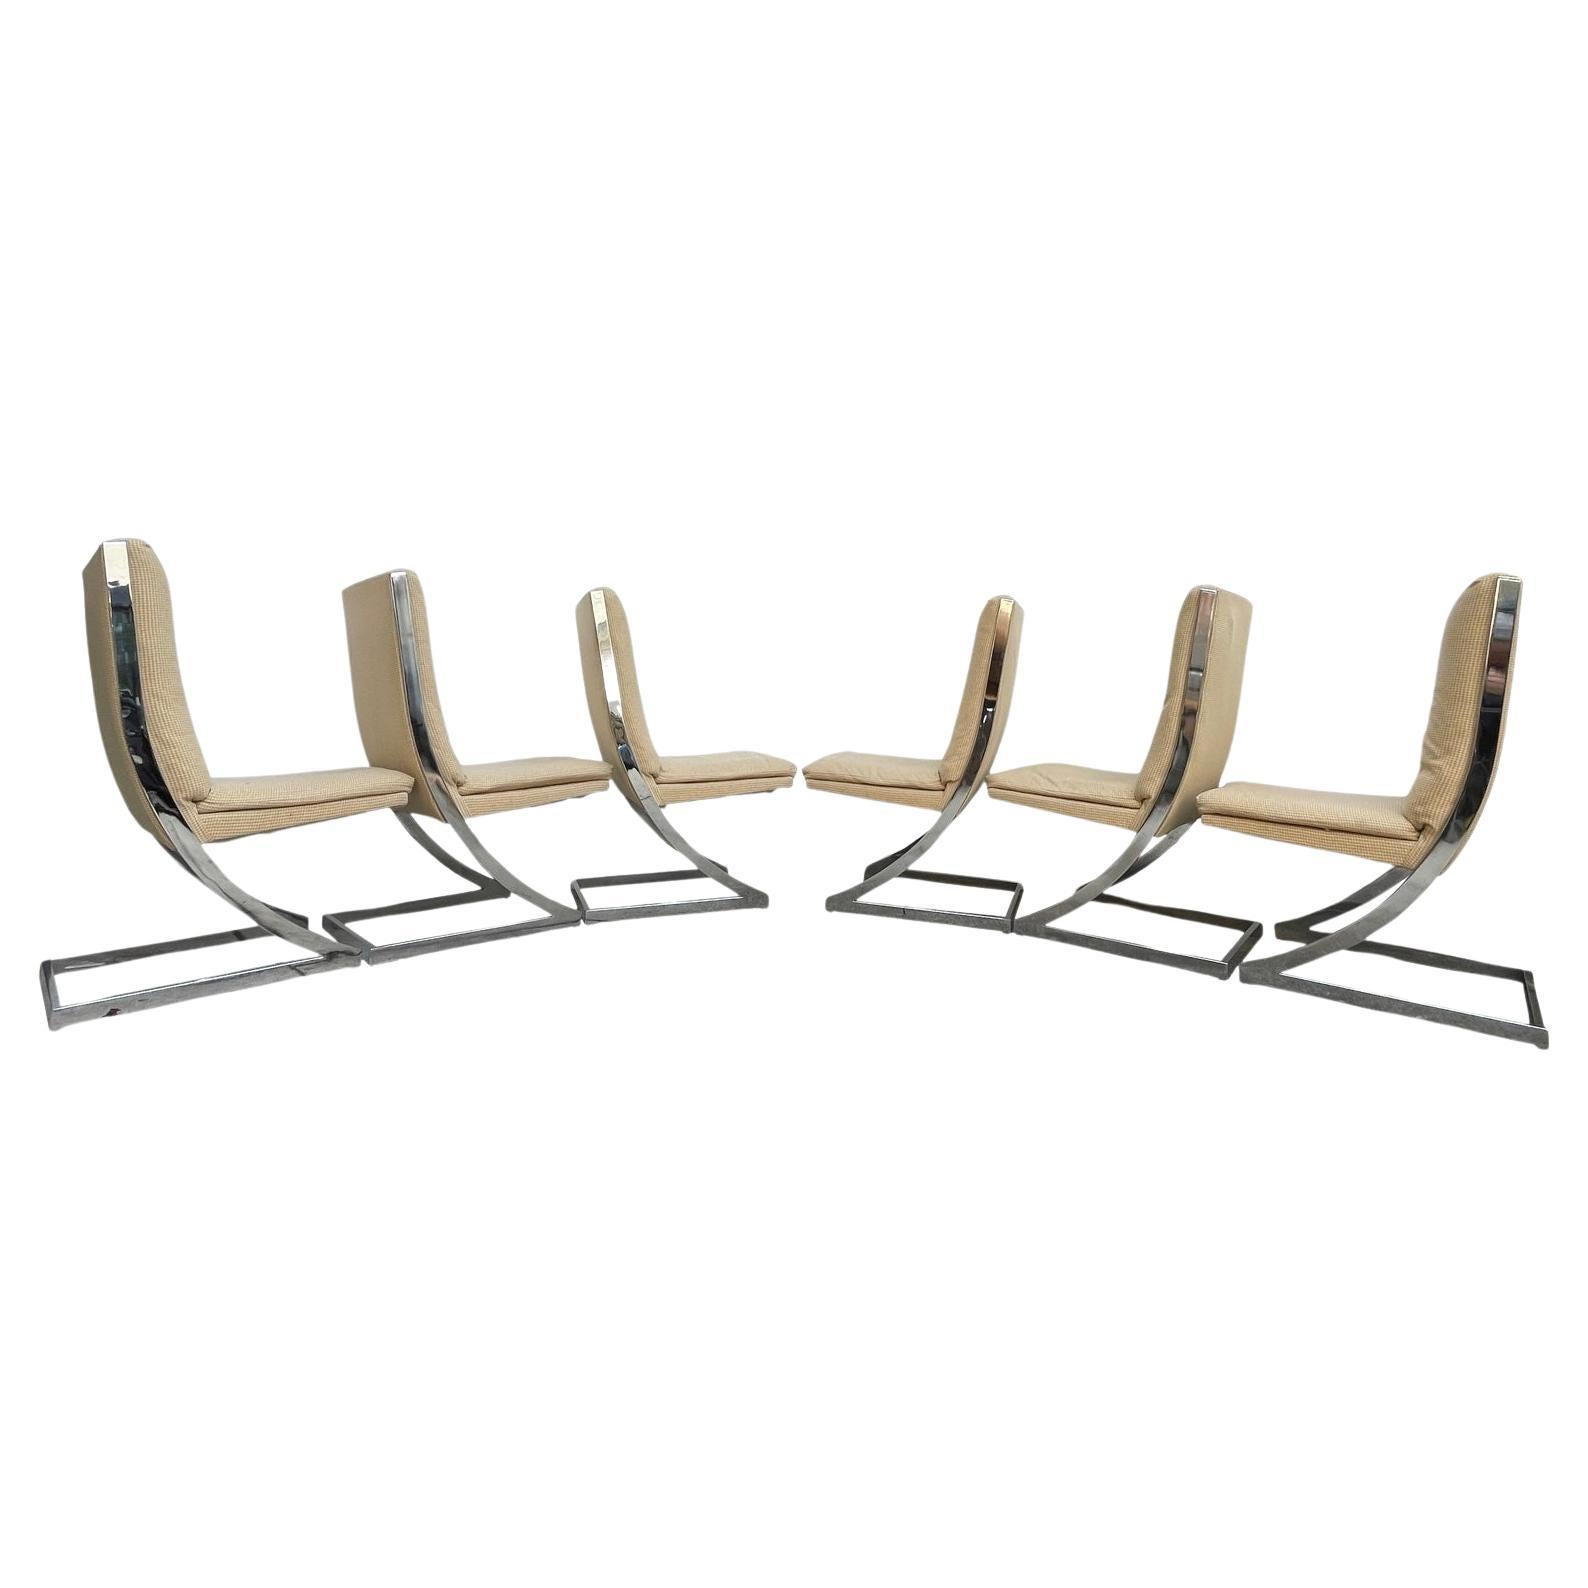 1980s DIA Vintage Milo Baughman Cantilever Z Dining Chairs Set Of 6